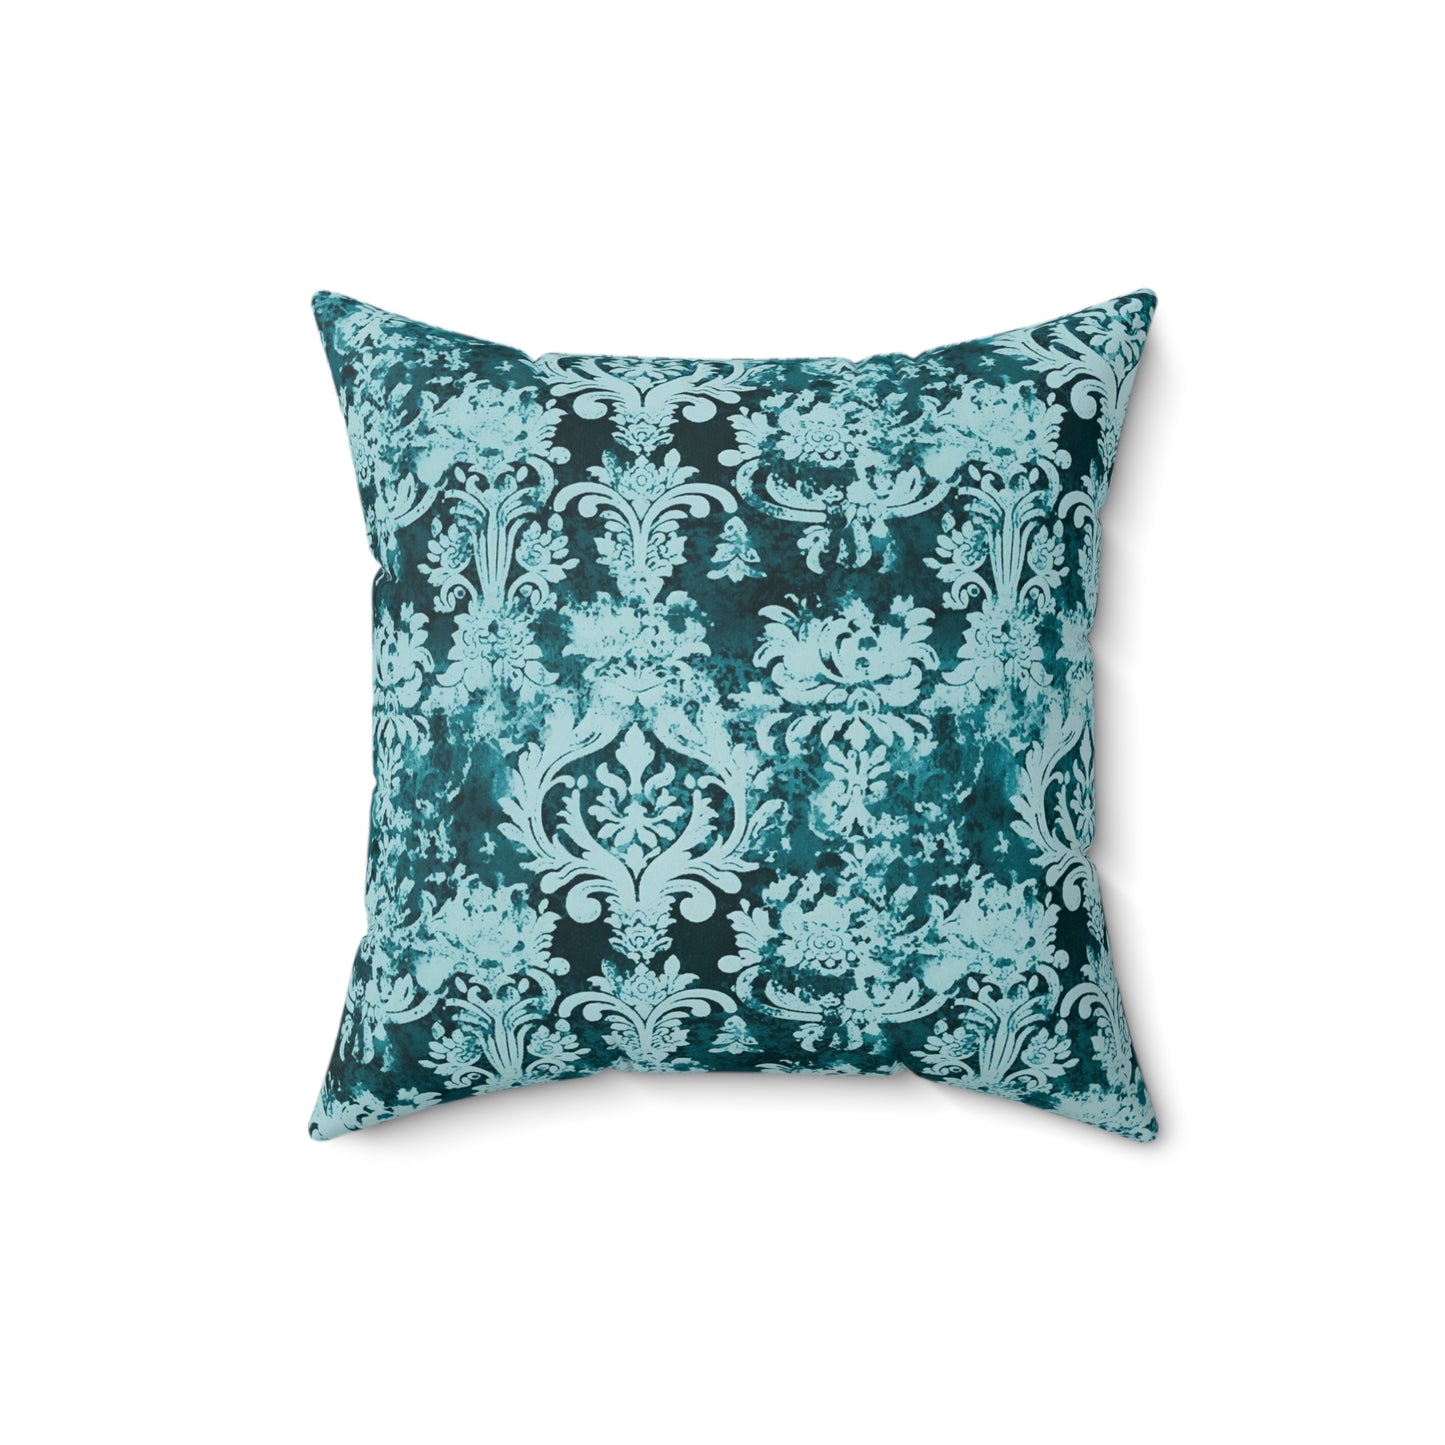 Vintage Teal Damask 73 - Beautiful, Shabby Chic, Boho, Fun -  - Faux Suede Square Pillow